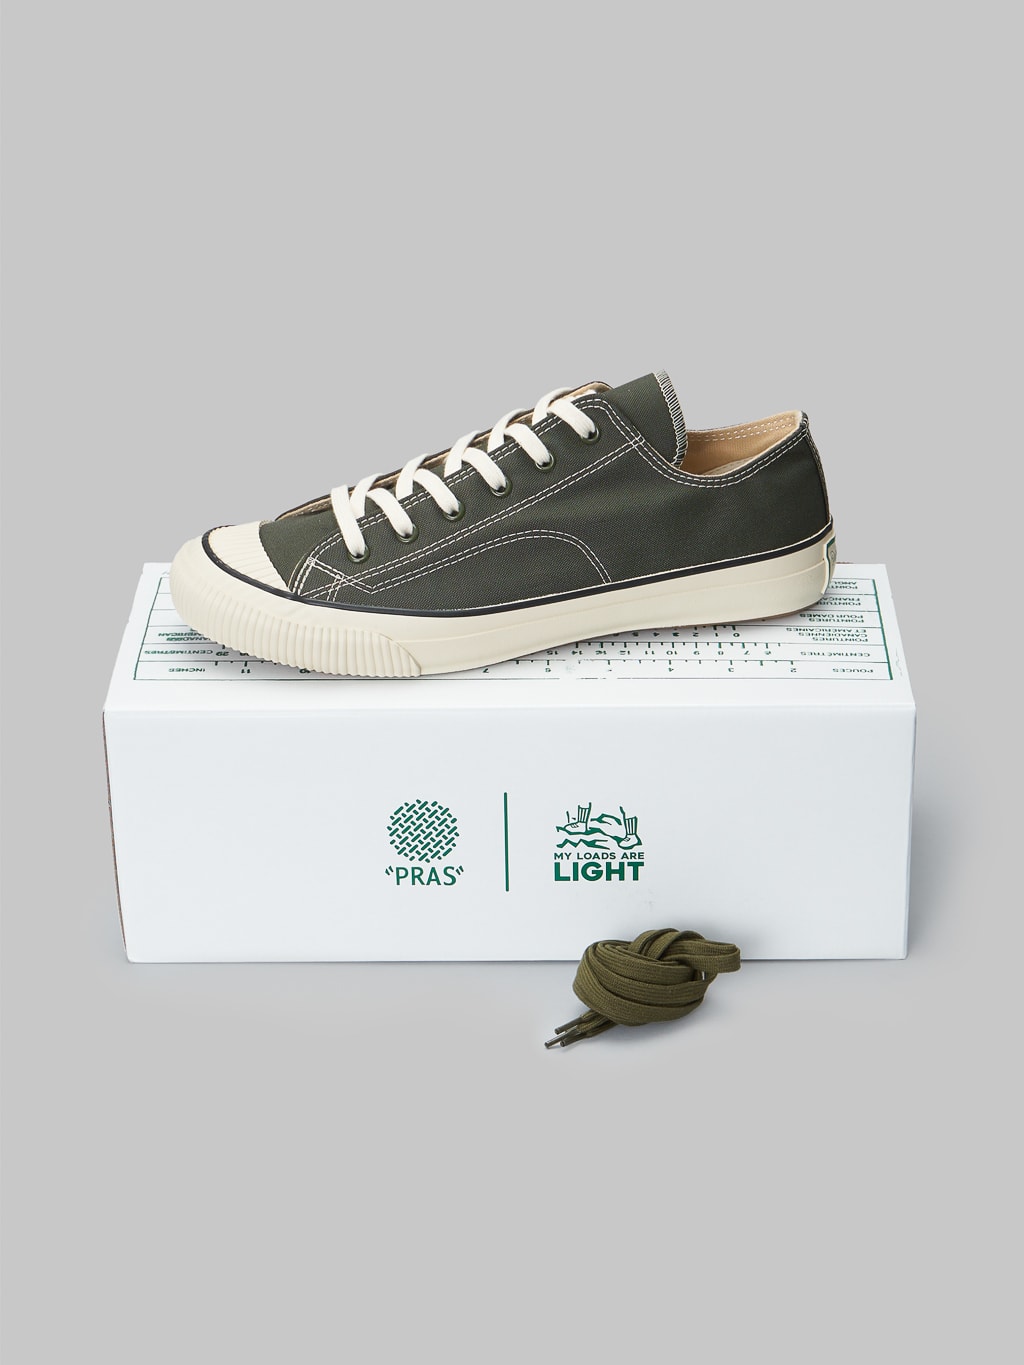 Pras x My Loads are Light low sneakers khaki packaging